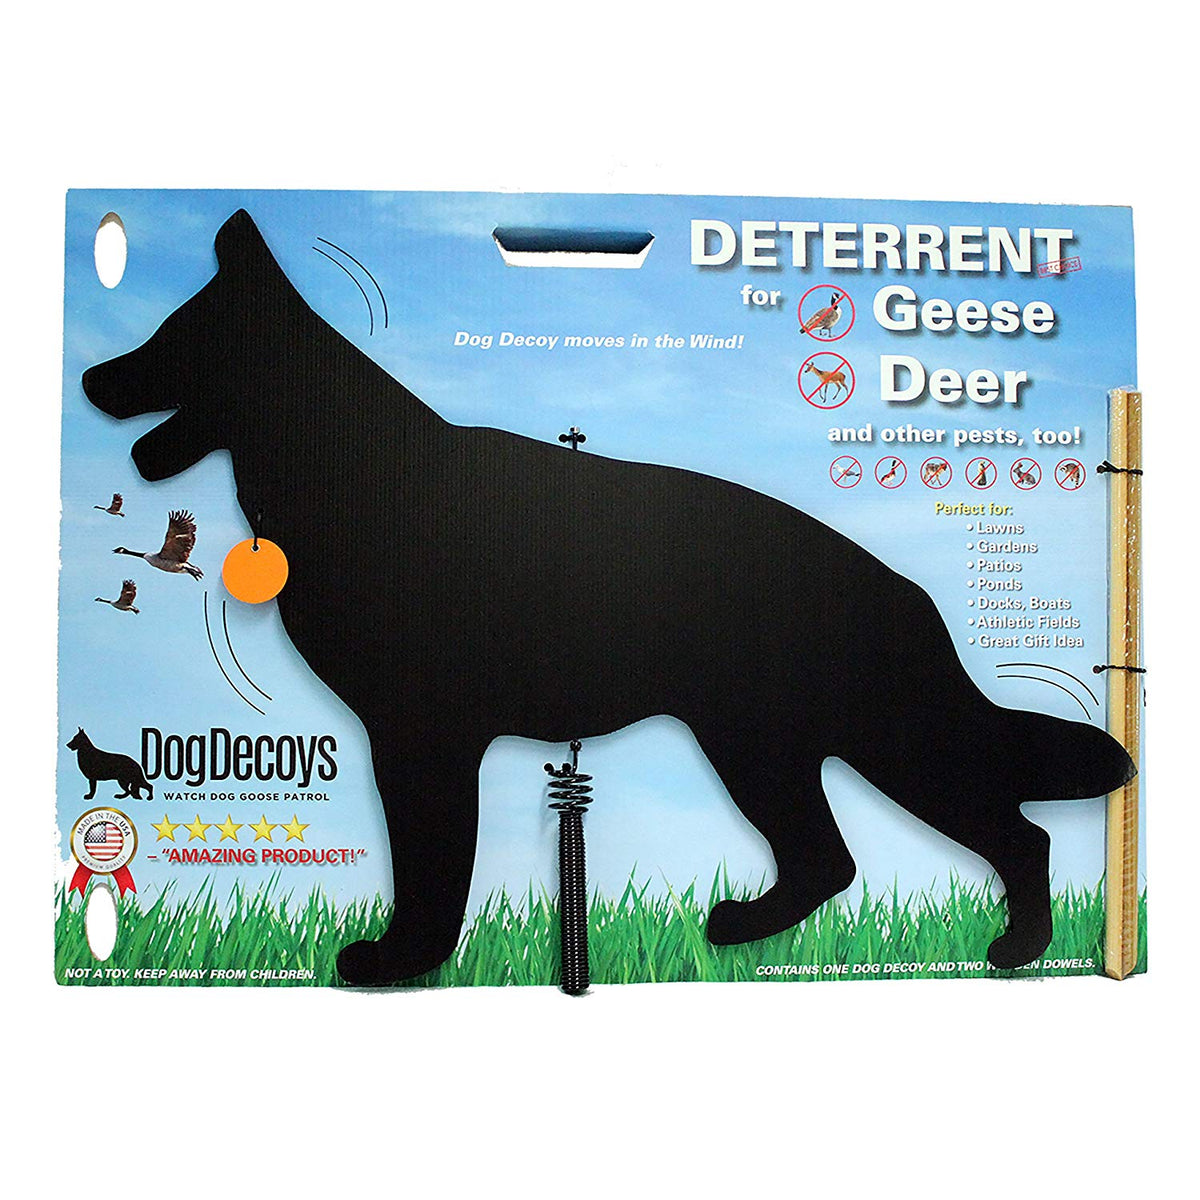 DogDecoys R123196 For Geese And Deer Repellent